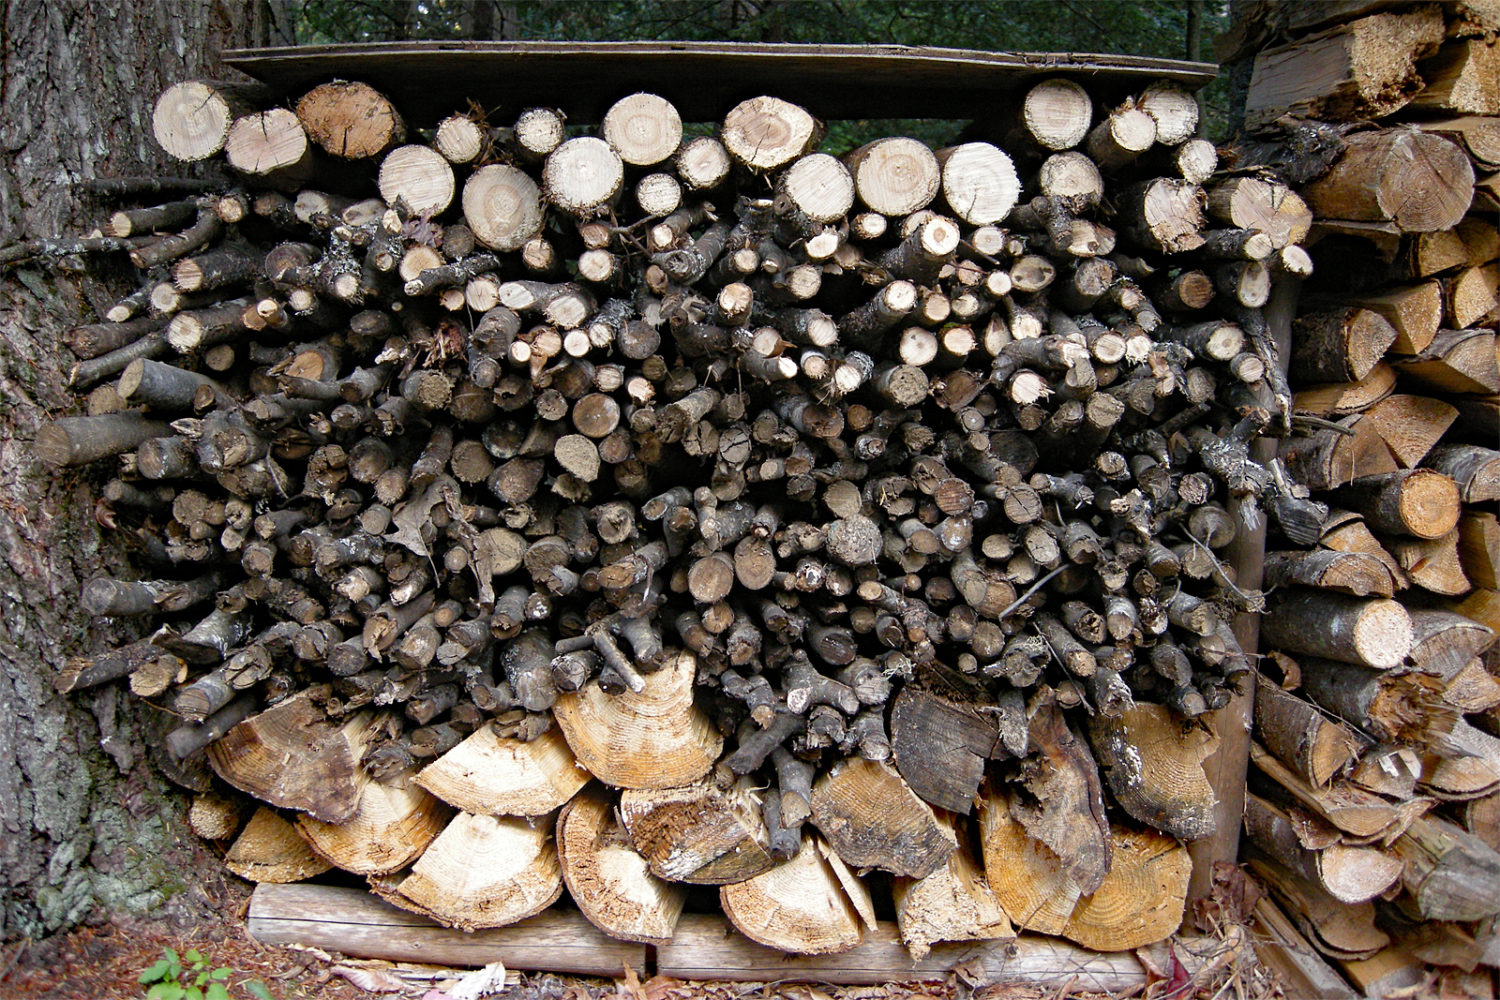 Pete and Shelley's wood pile 2008